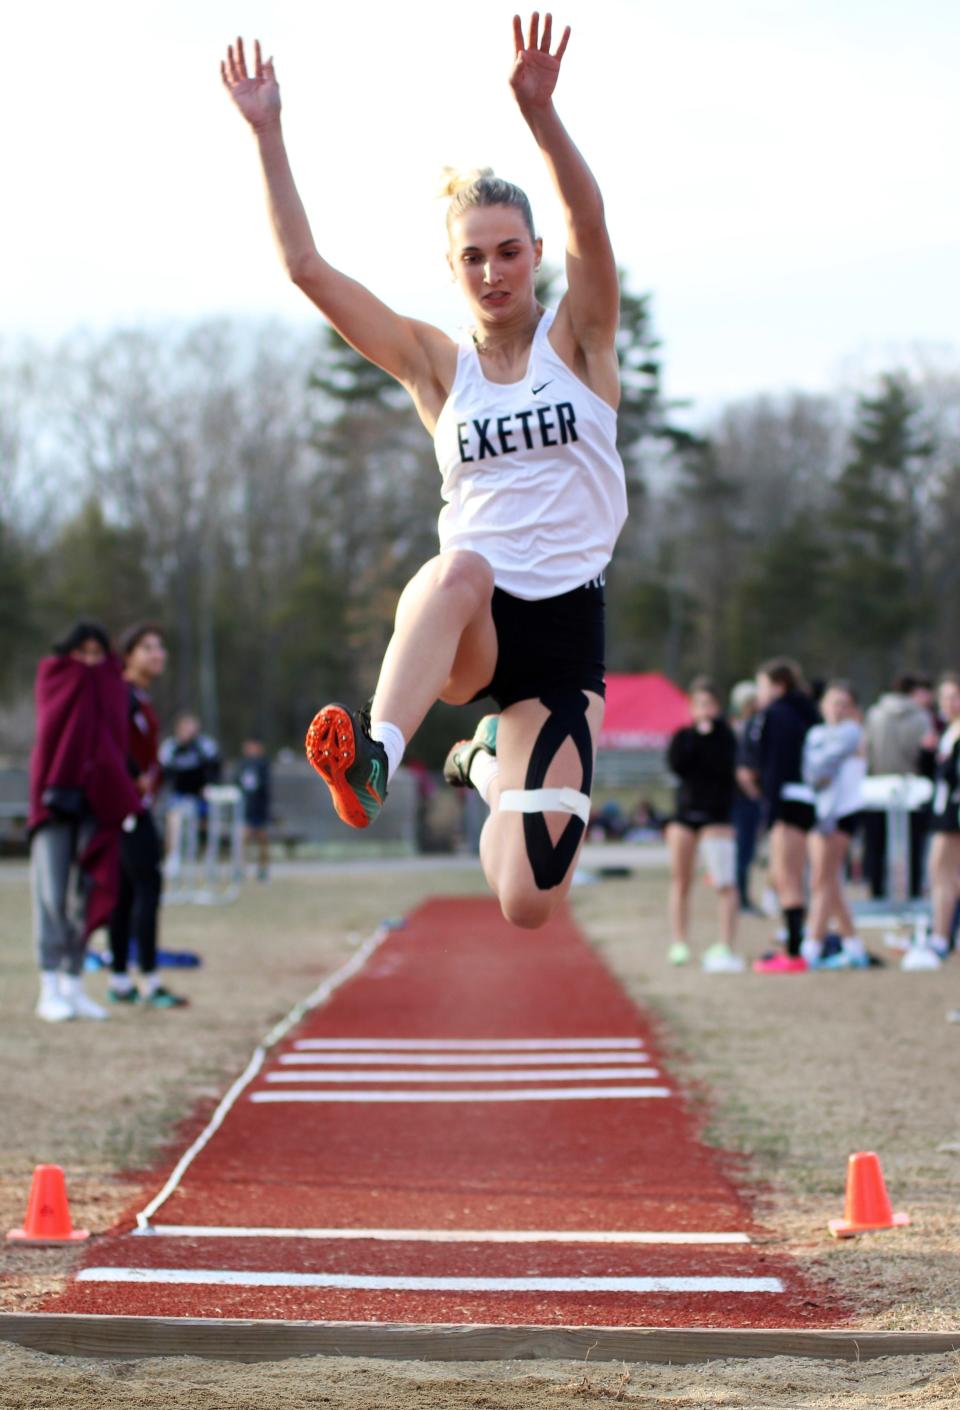 Exeter's Rachel Poulin soars to a first-place performance in the long jump (15-9) at Tuesday's season-opening tri-meet with Portsmouth and Winnacunnet.